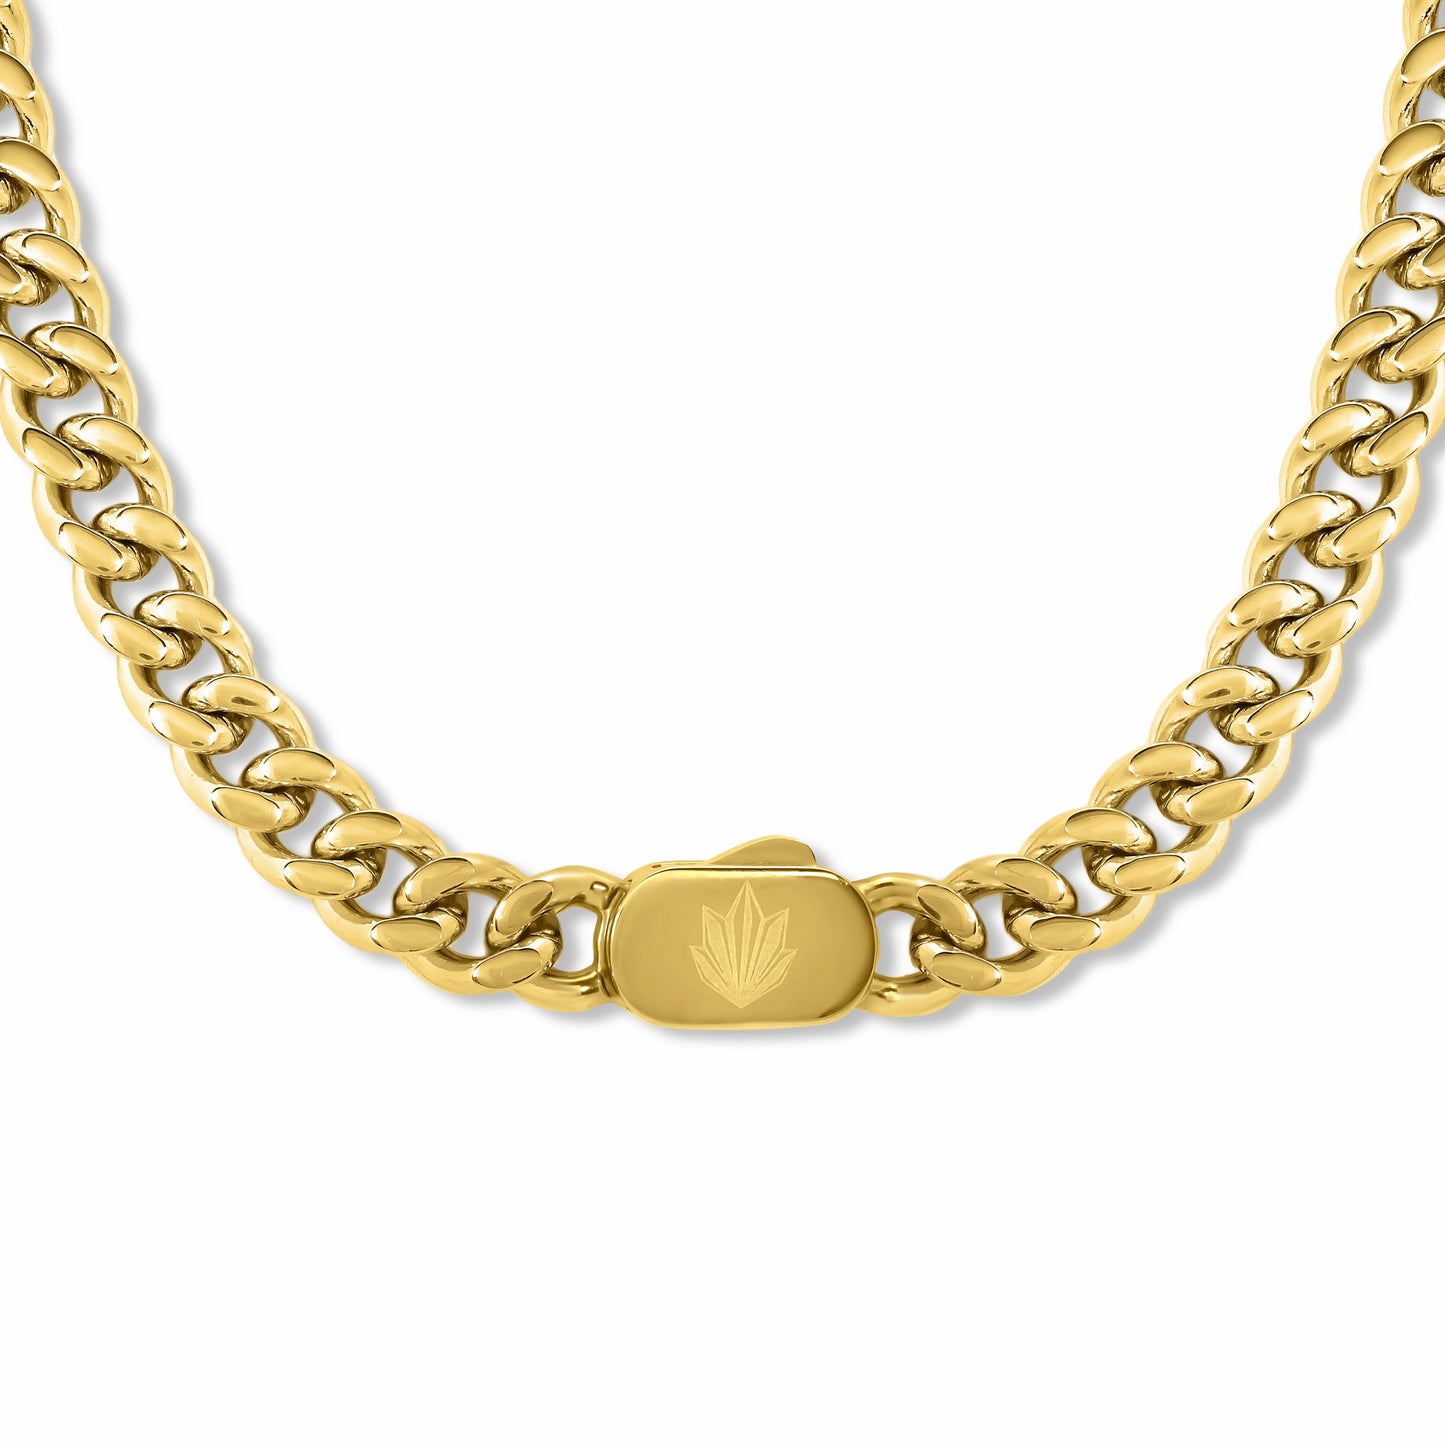 Cuban Chain Gold 8mm - clasp with engraved logo tag on white background